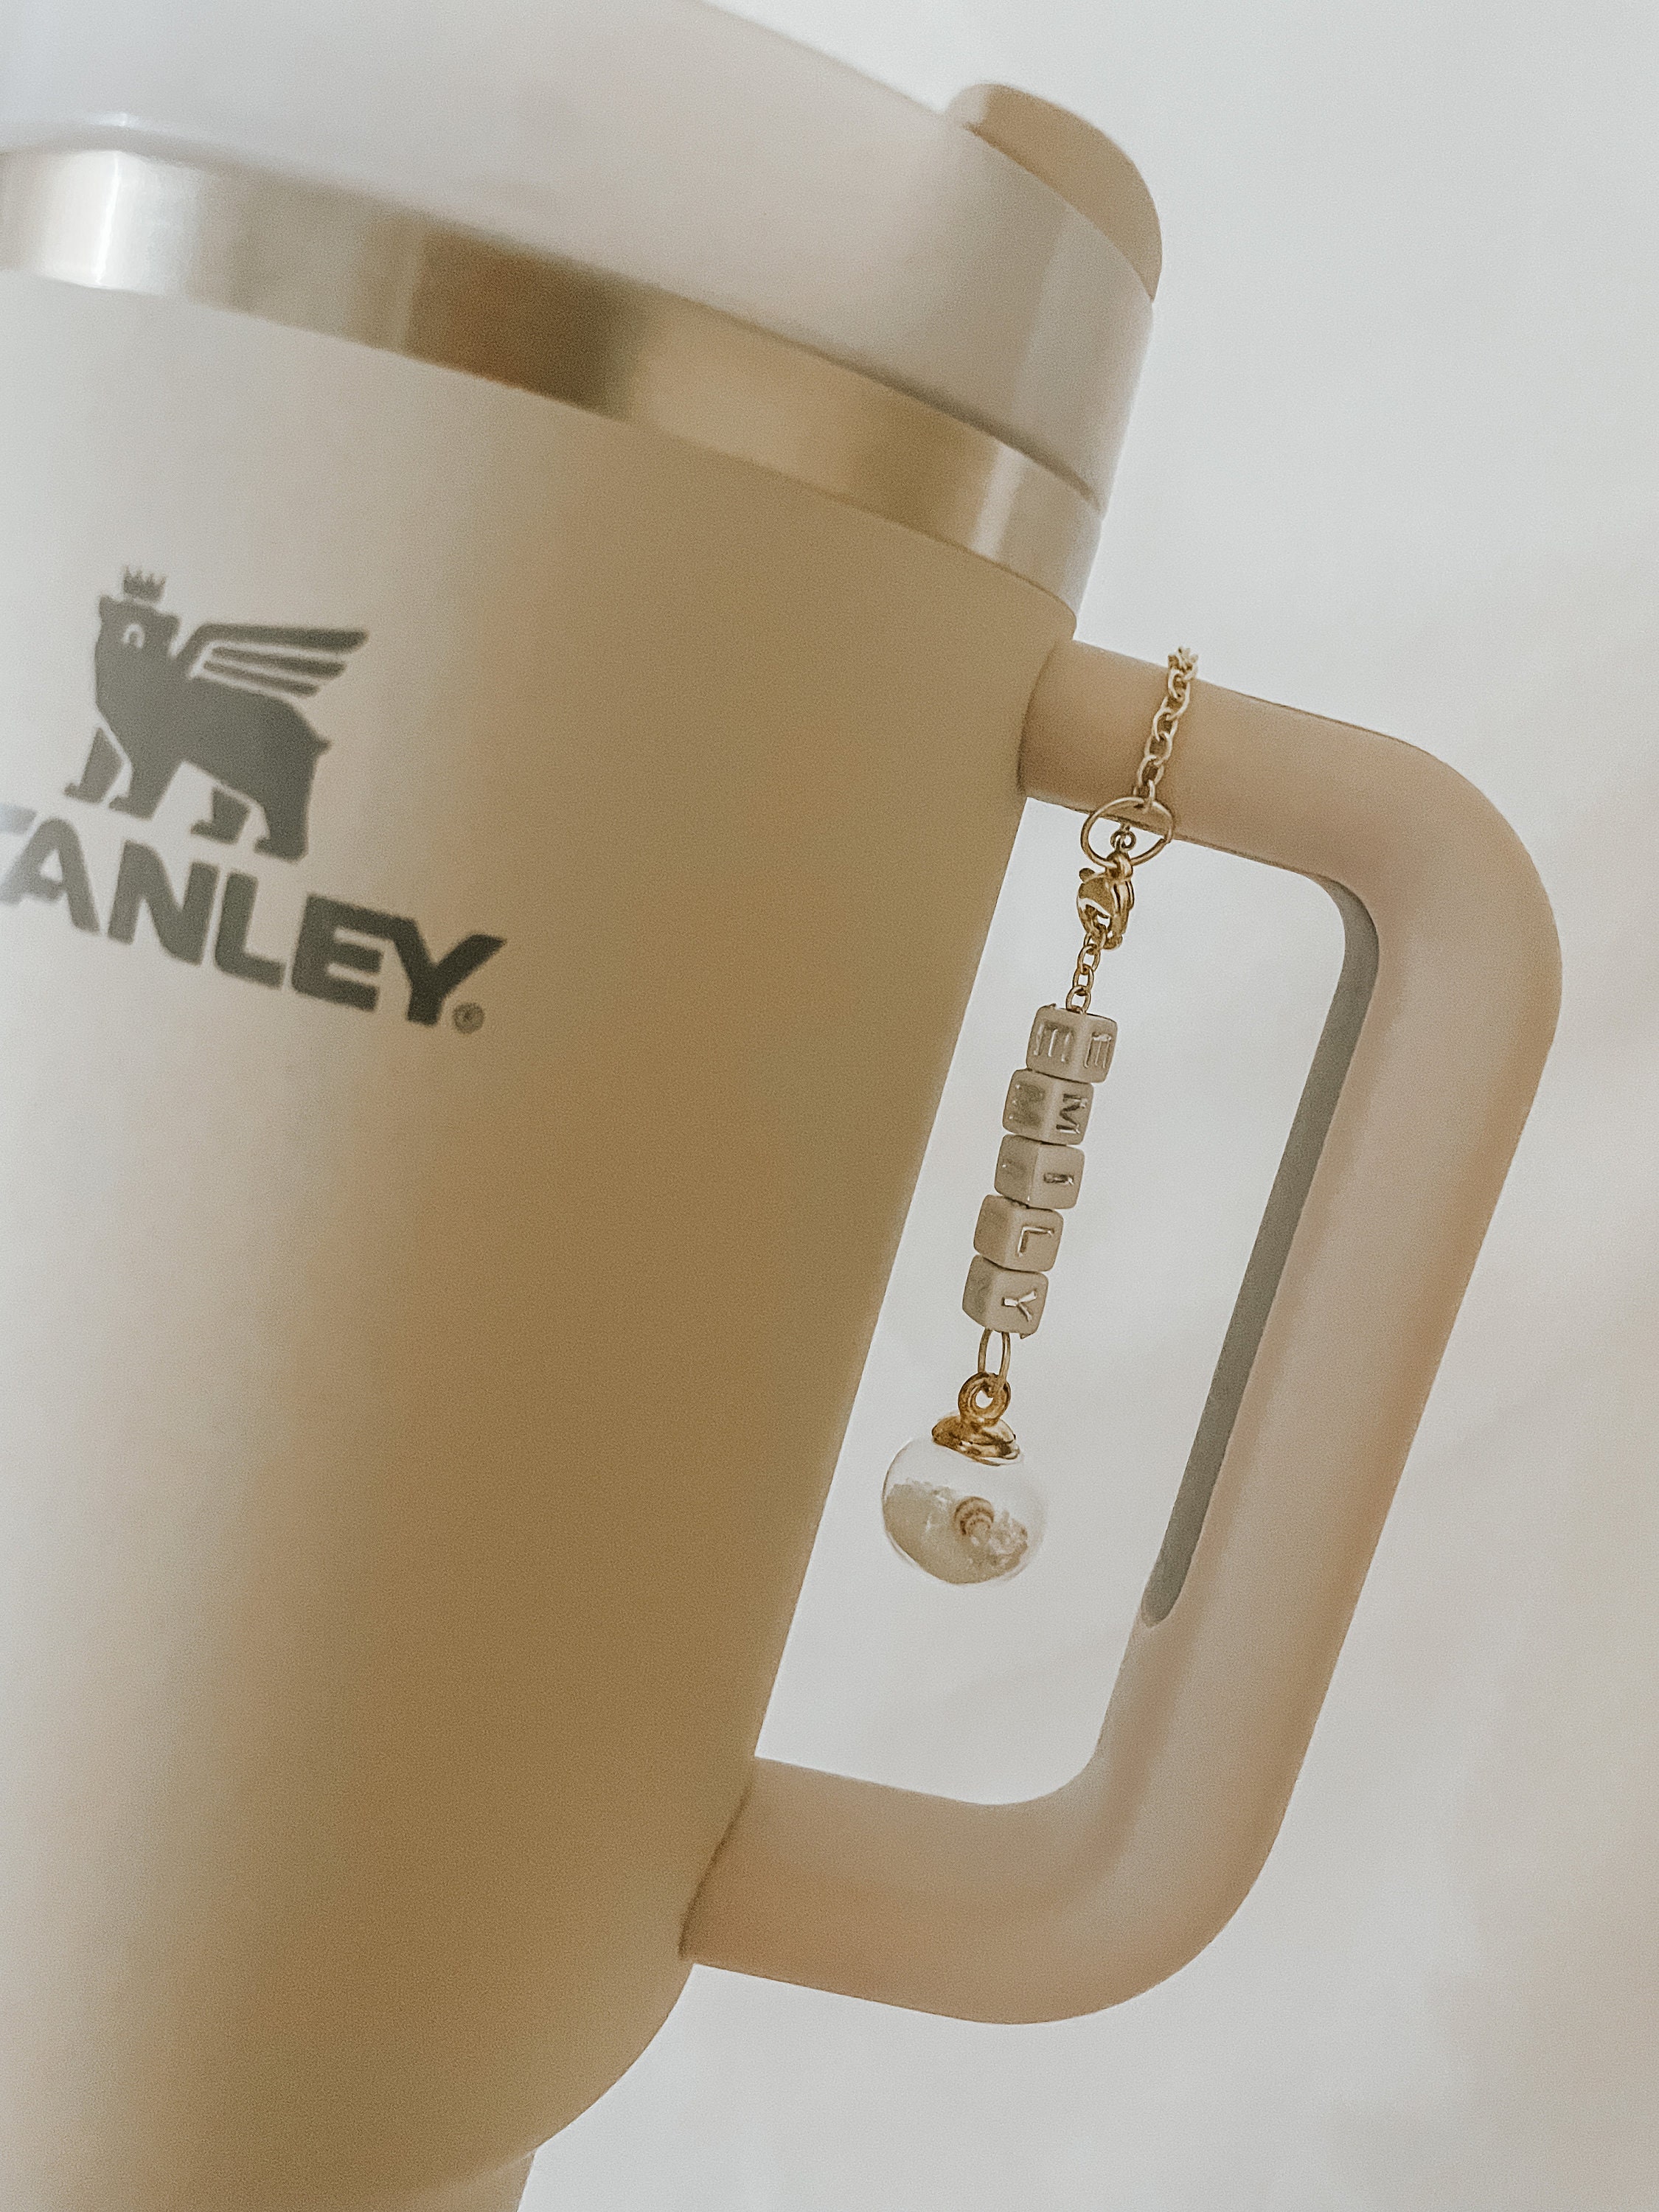 CIZULFY Charm for Stanley Cup Accessories, Cute Dog Charm for  Stanley/Simple Modern/Yeti Cup with Handle, Stanley Cup Charms for Stanley  Accessories.